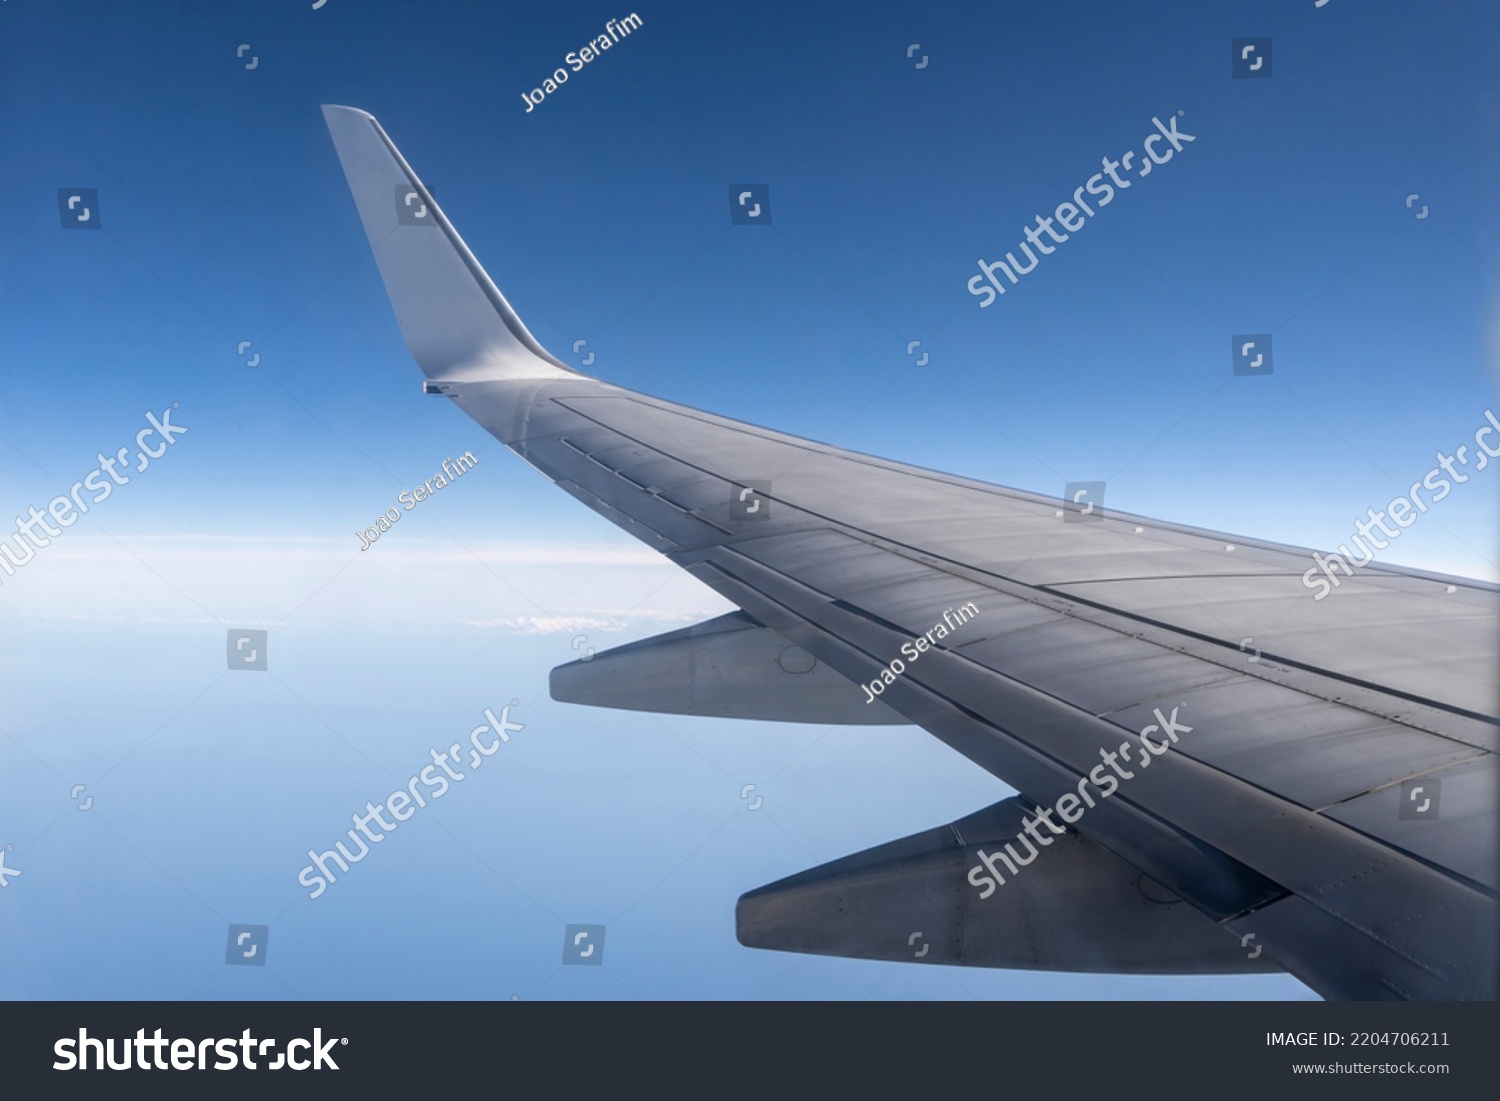 View from the inside or interior of the airplane. Airplane porthole window view from the passenger seat #2204706211